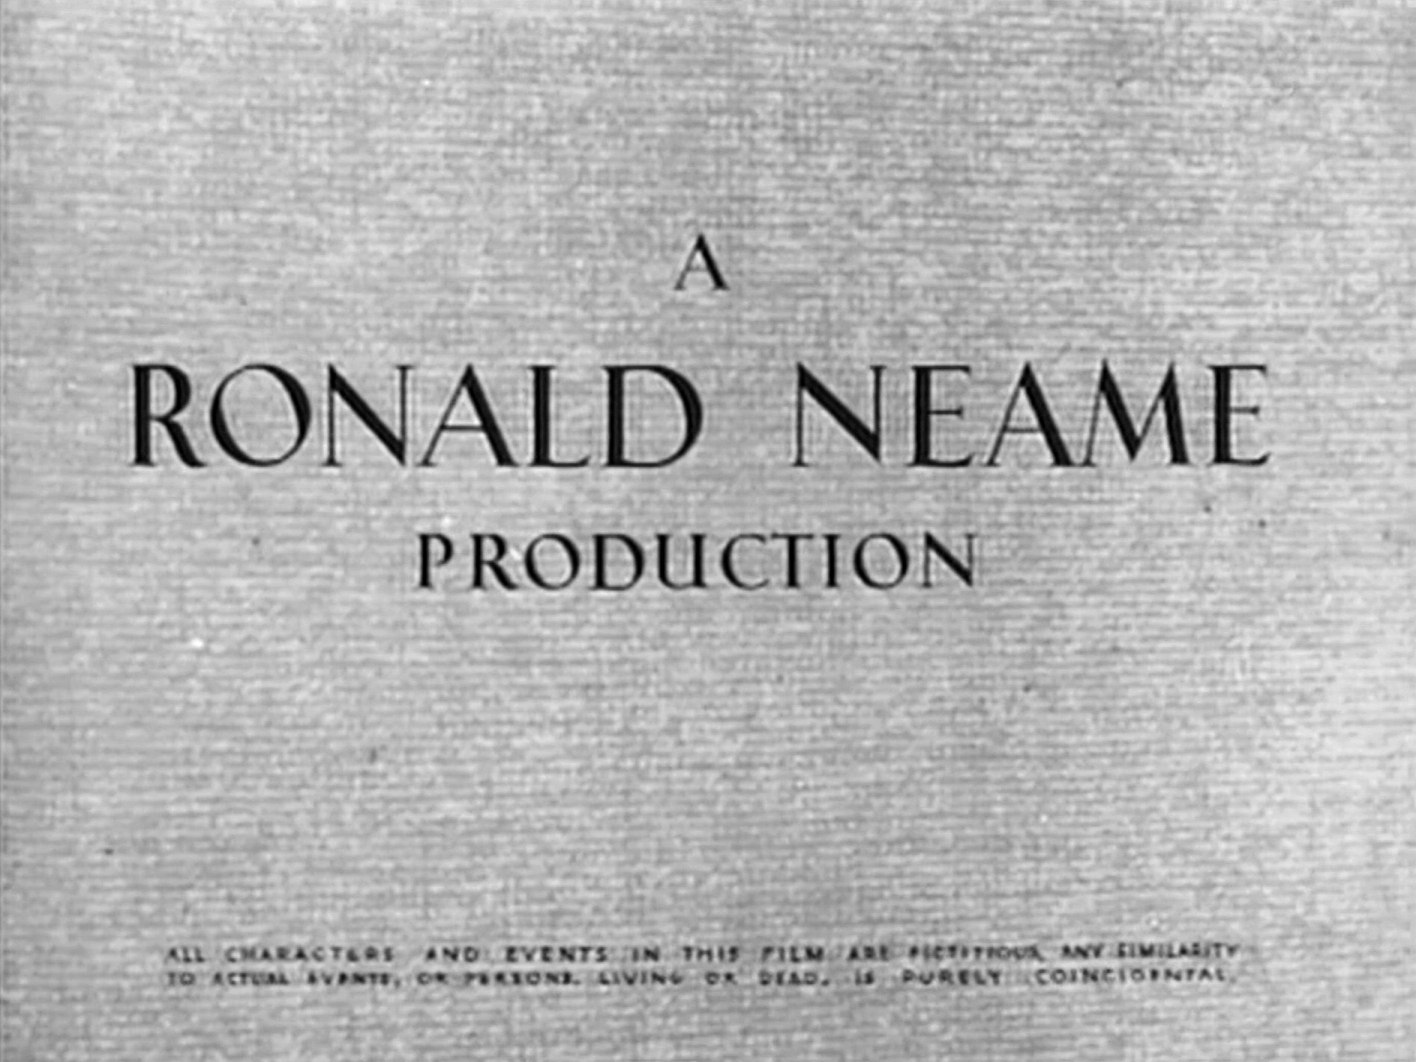 Main title from The Card (1952) (2). A Ronald Neame Production